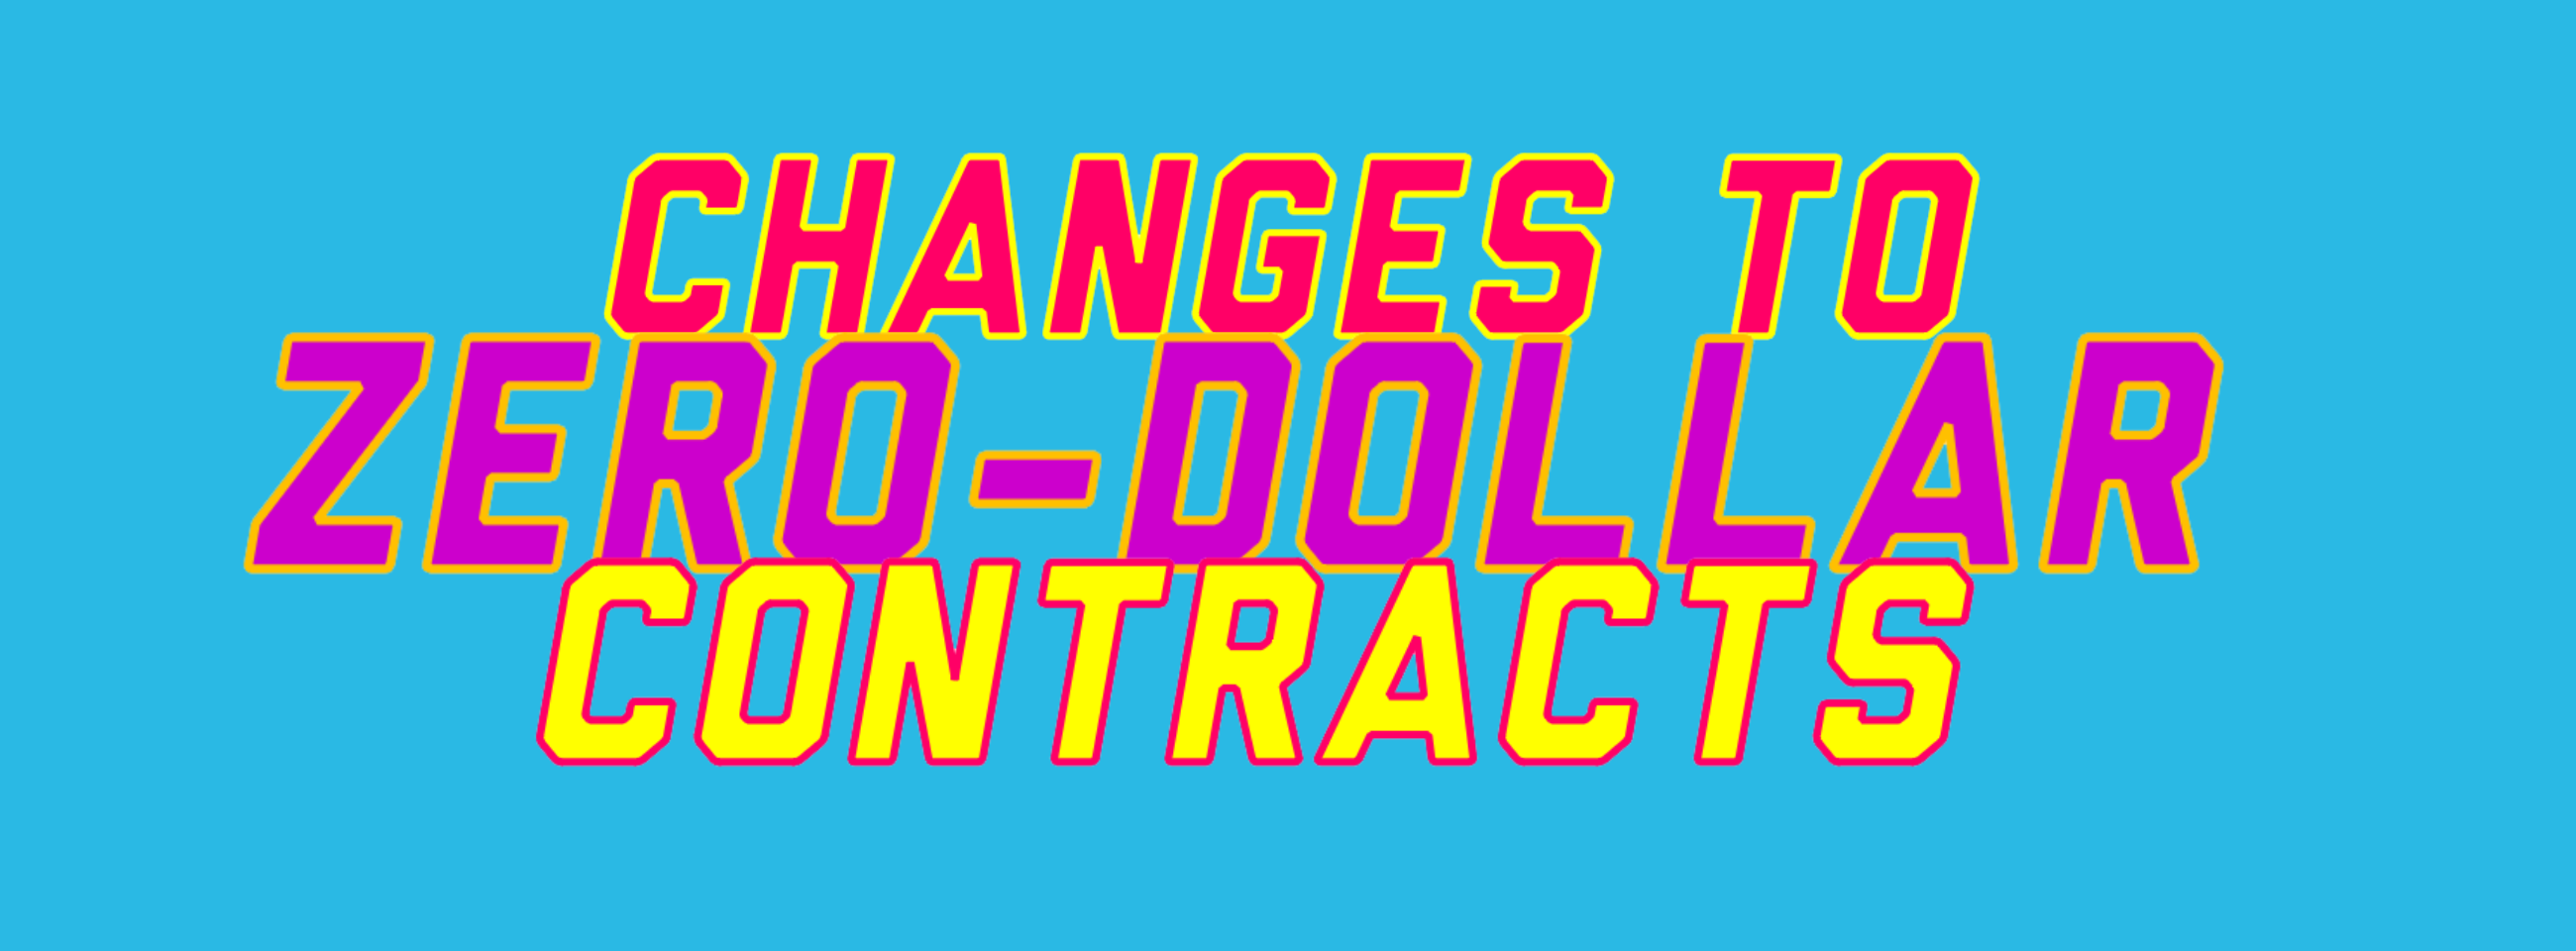 Changes to Zero-Dollar Contracts